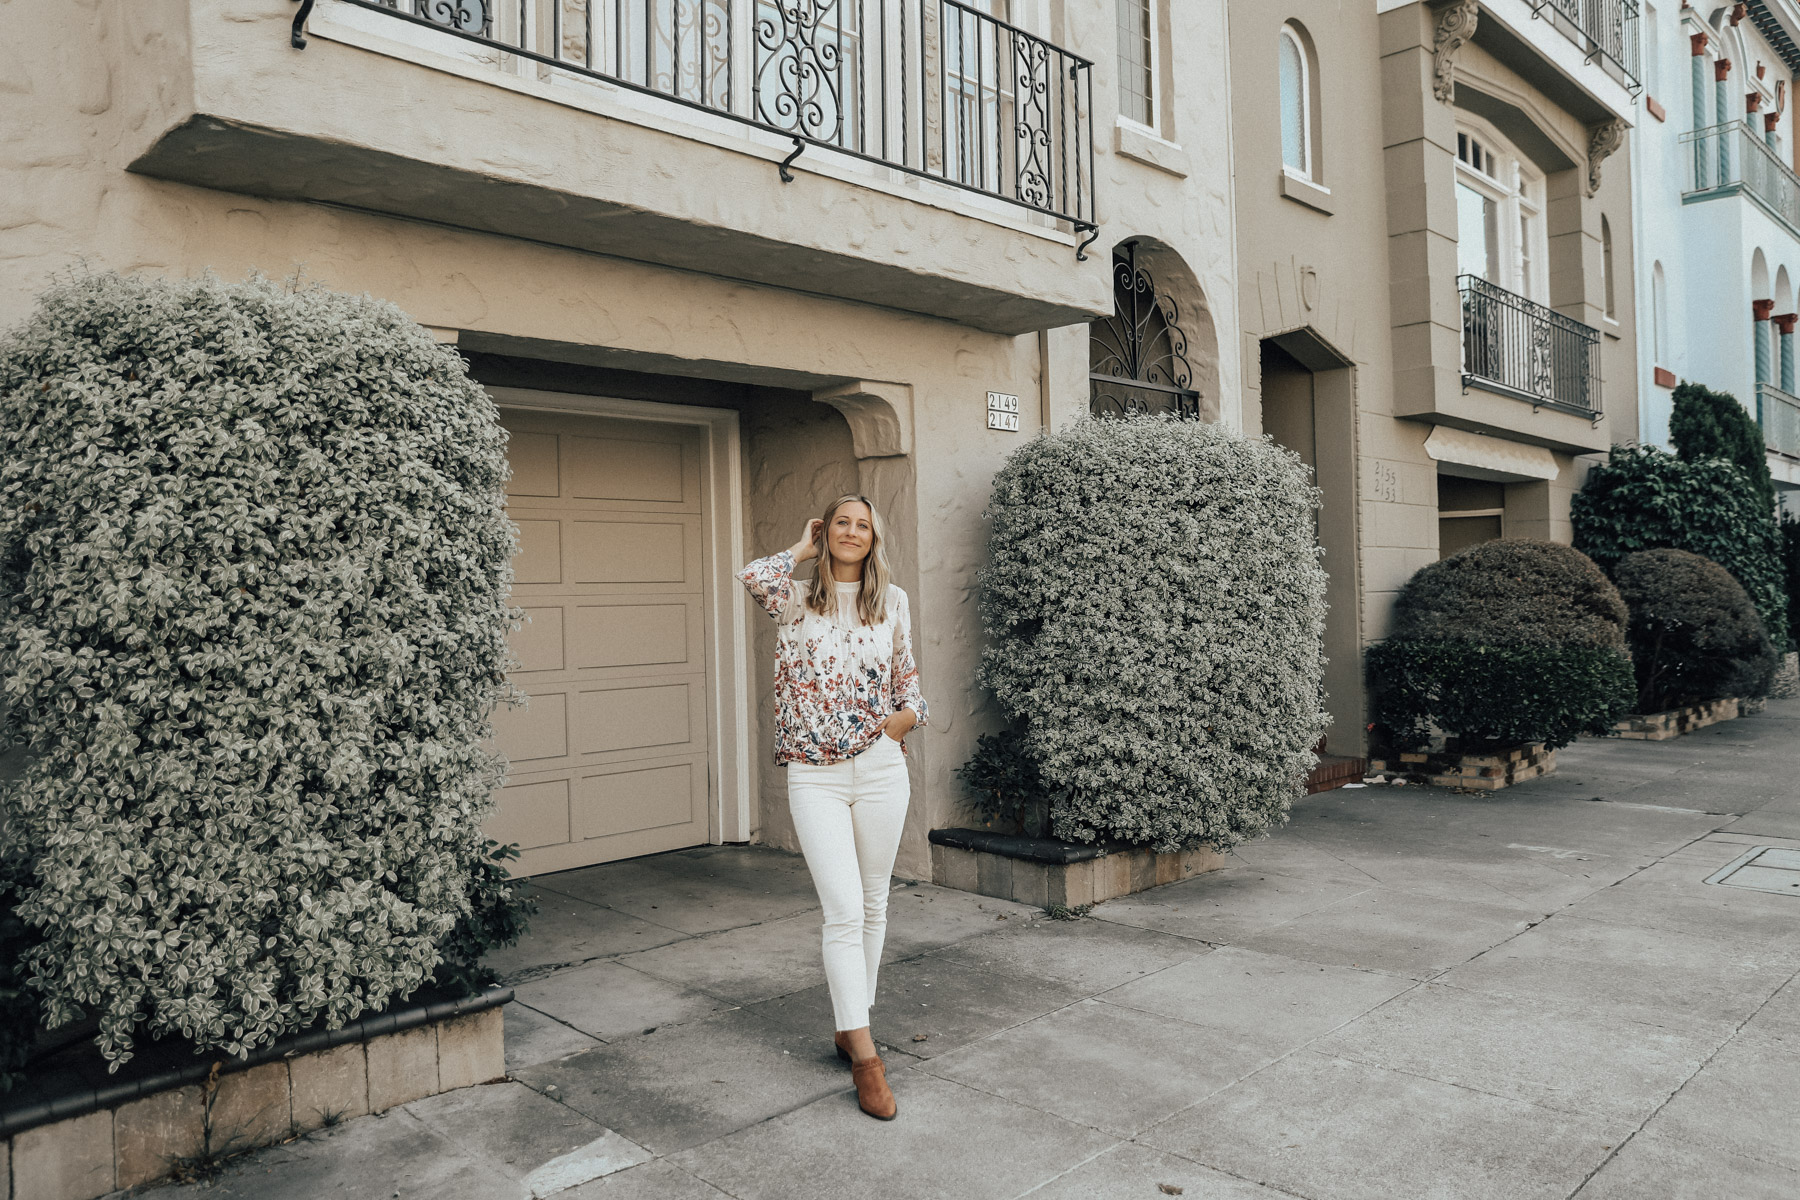 fall color trend rust & ivory outfit